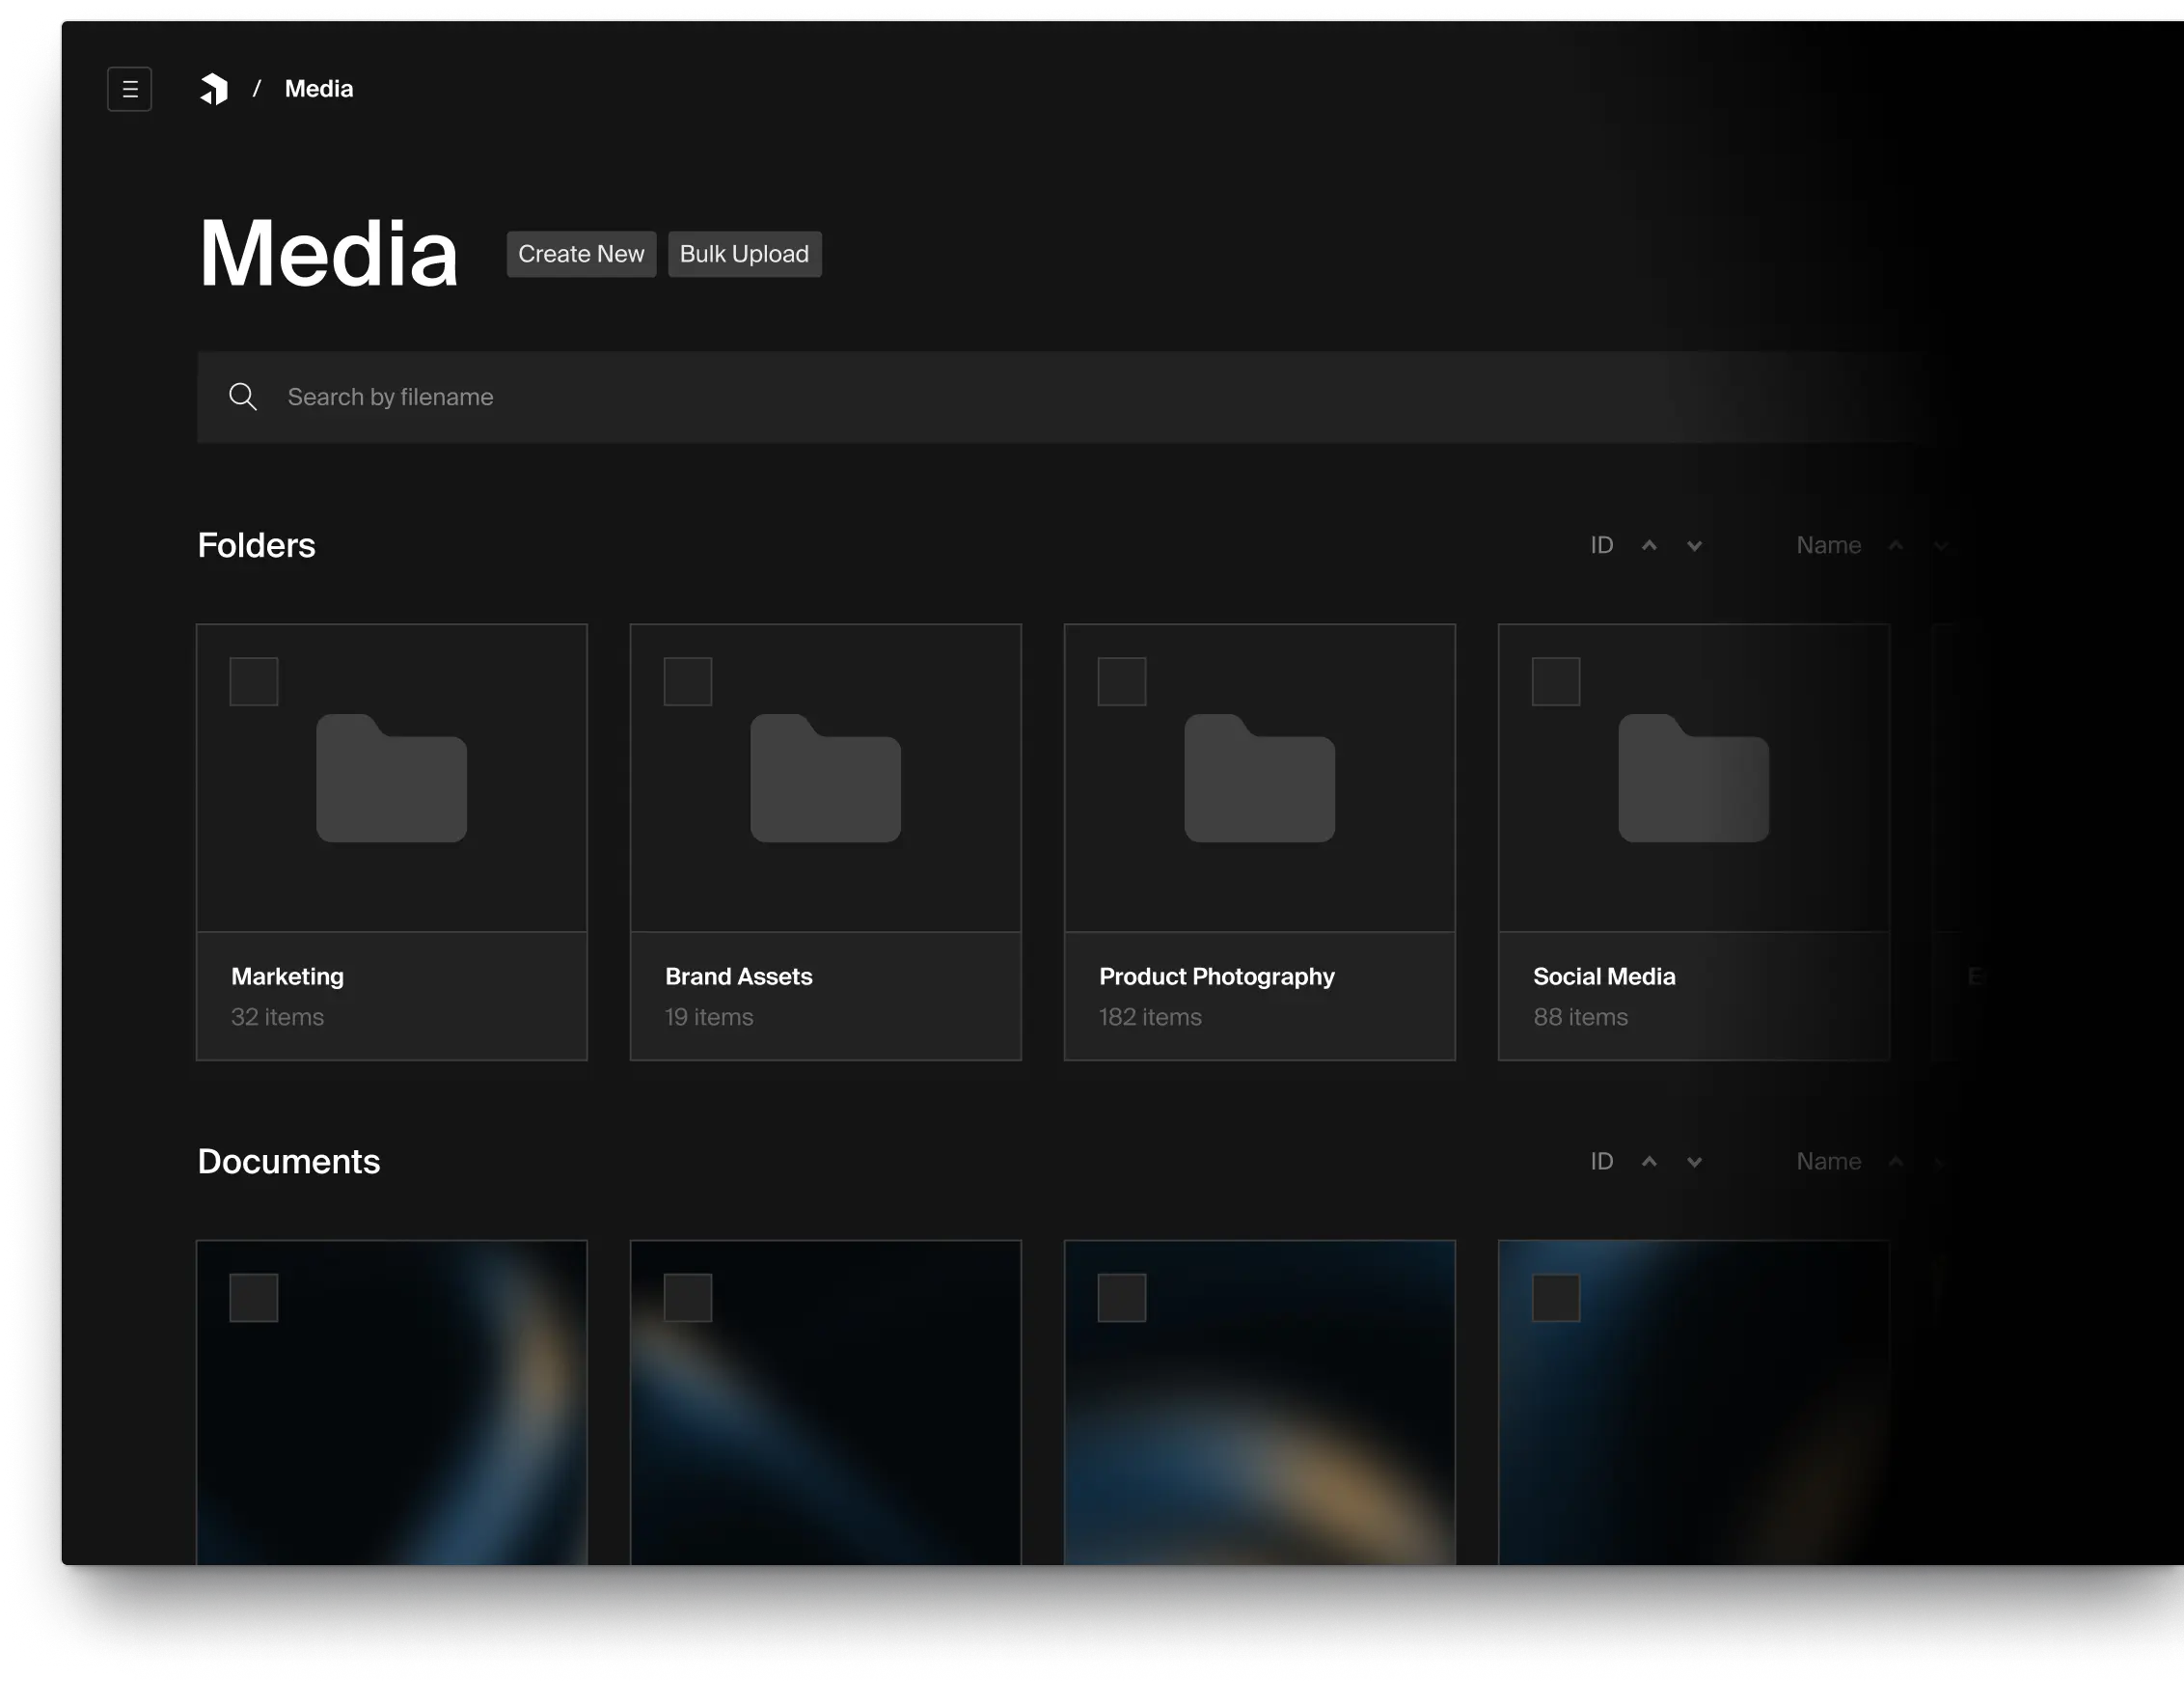 Folder view of a media collection.